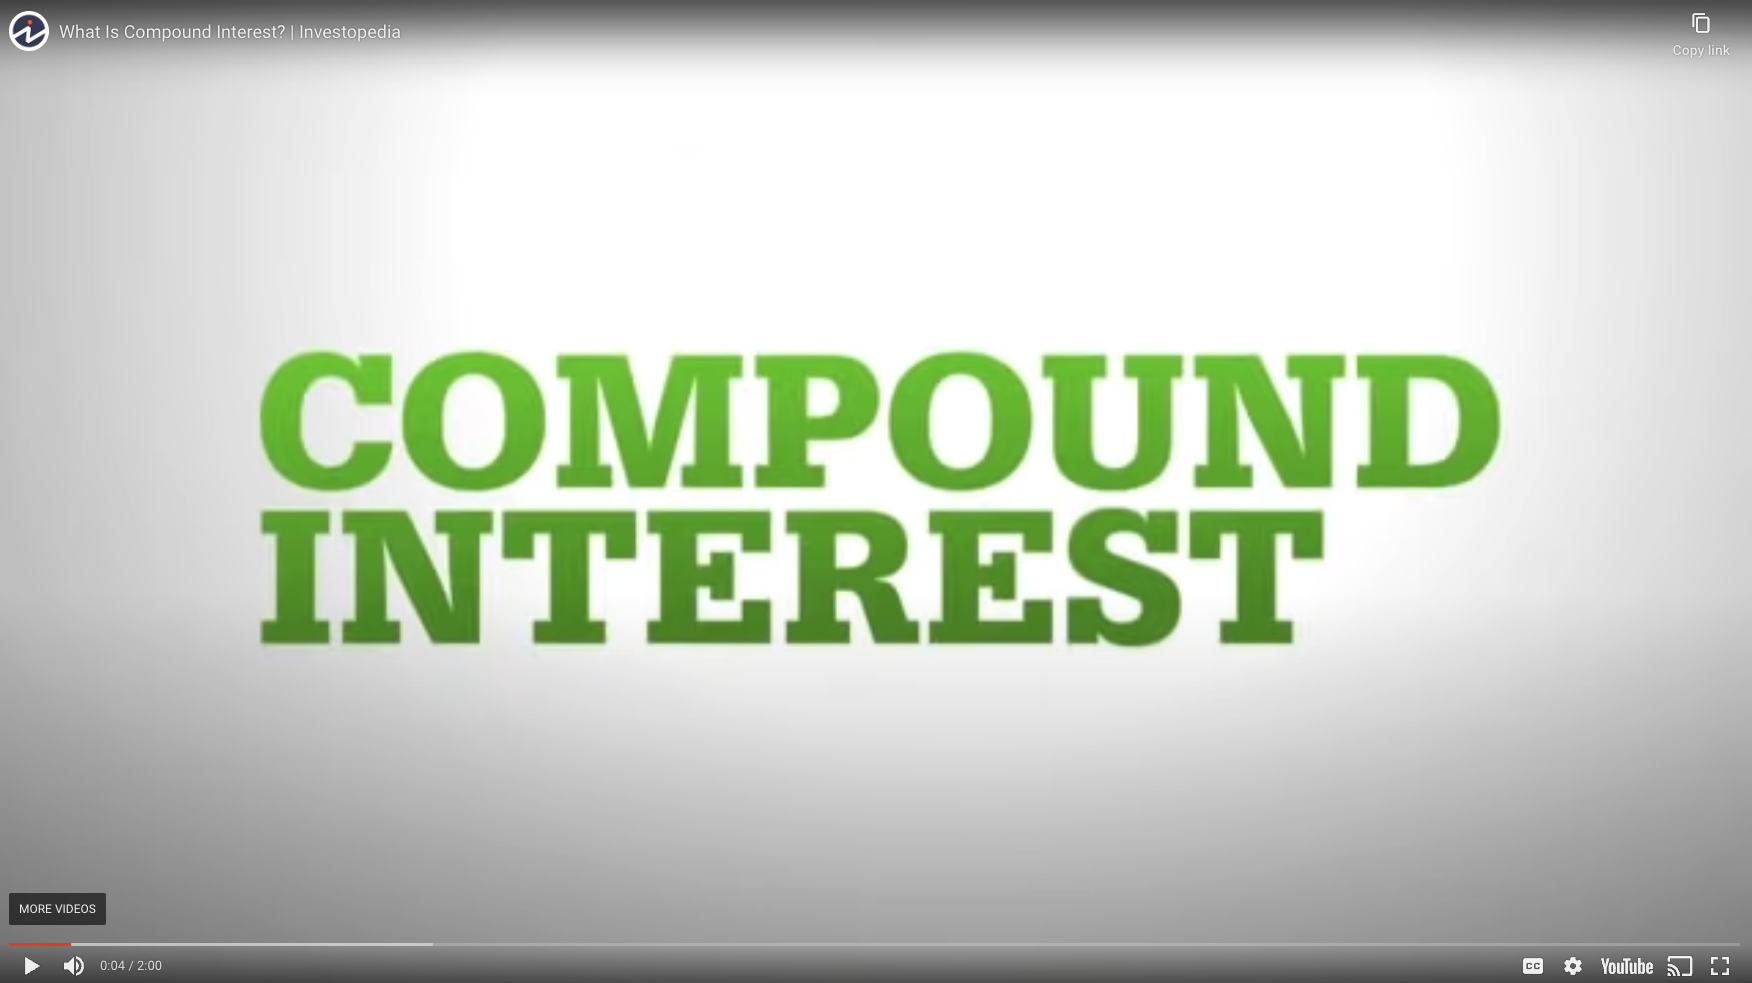 What is Compound Interest Video Thumbnail